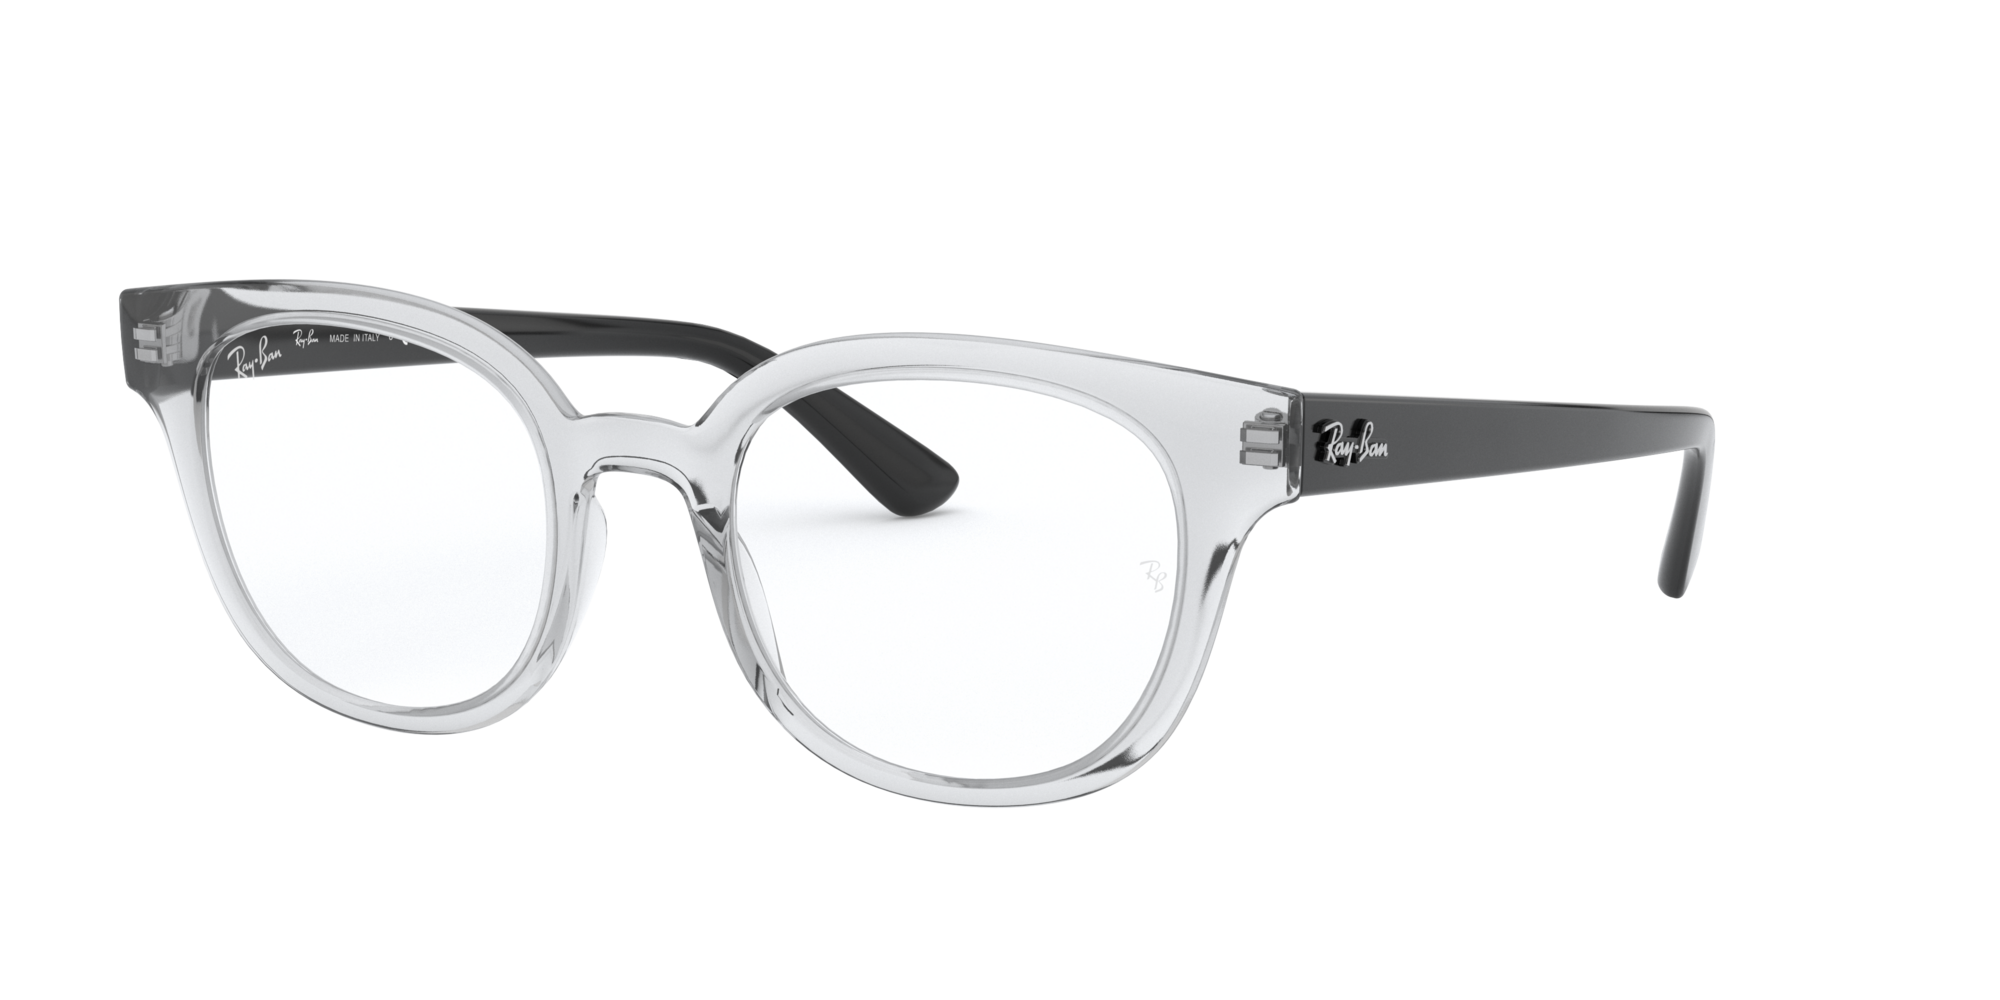 RX4324V: Shop Ray-Ban Clear/White Square Eyeglasses at LensCrafters